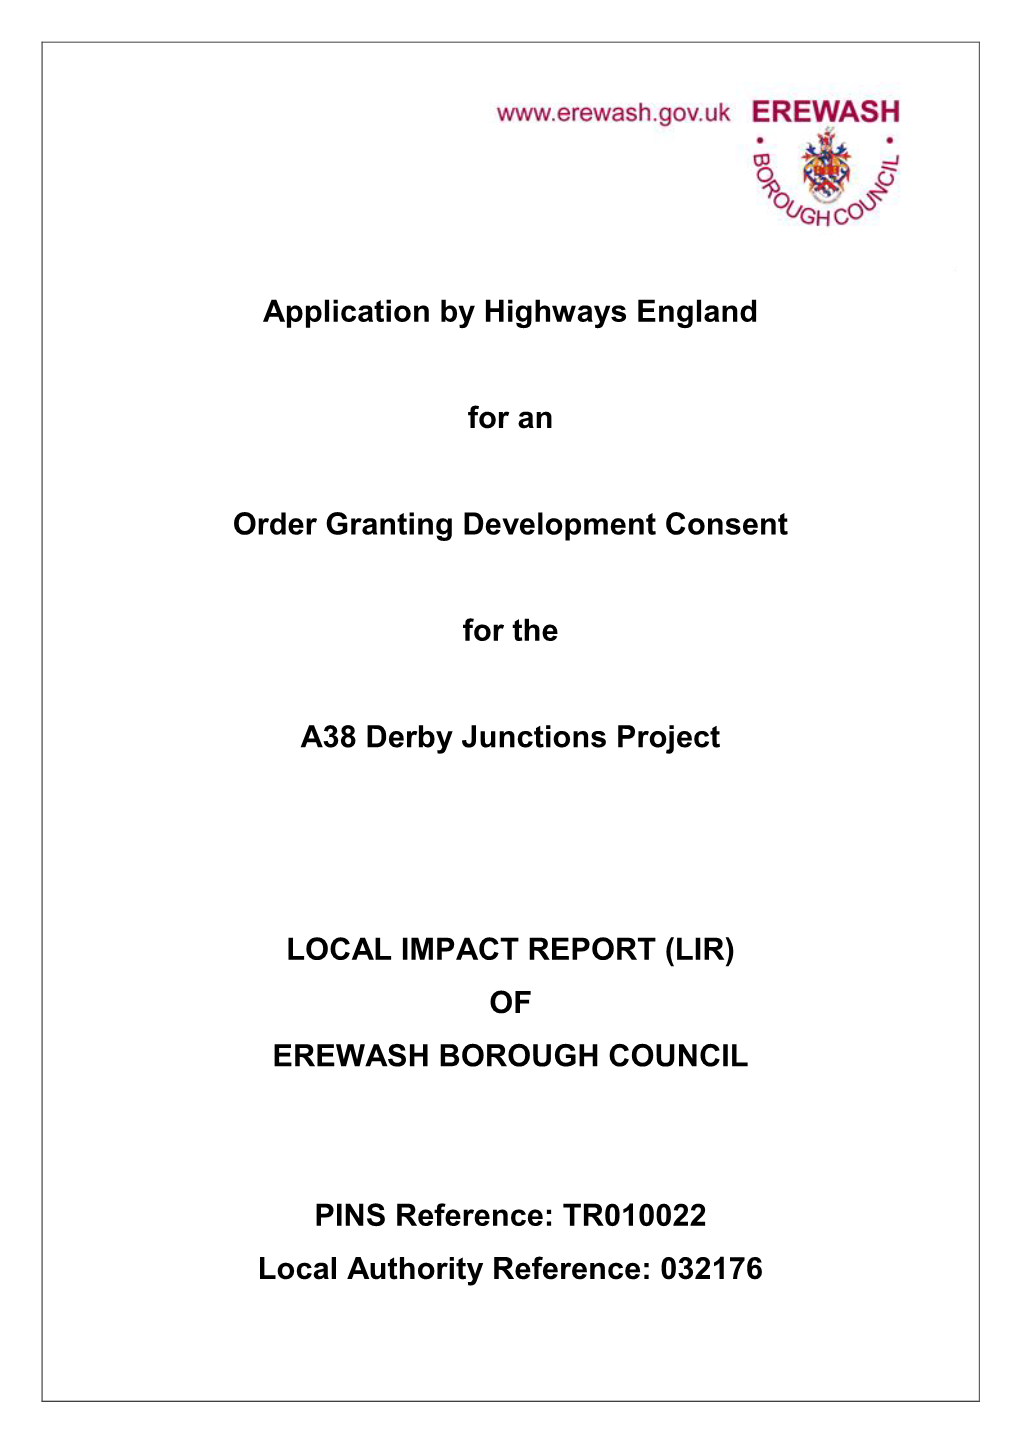 Application by Highways England for an Order Granting Development